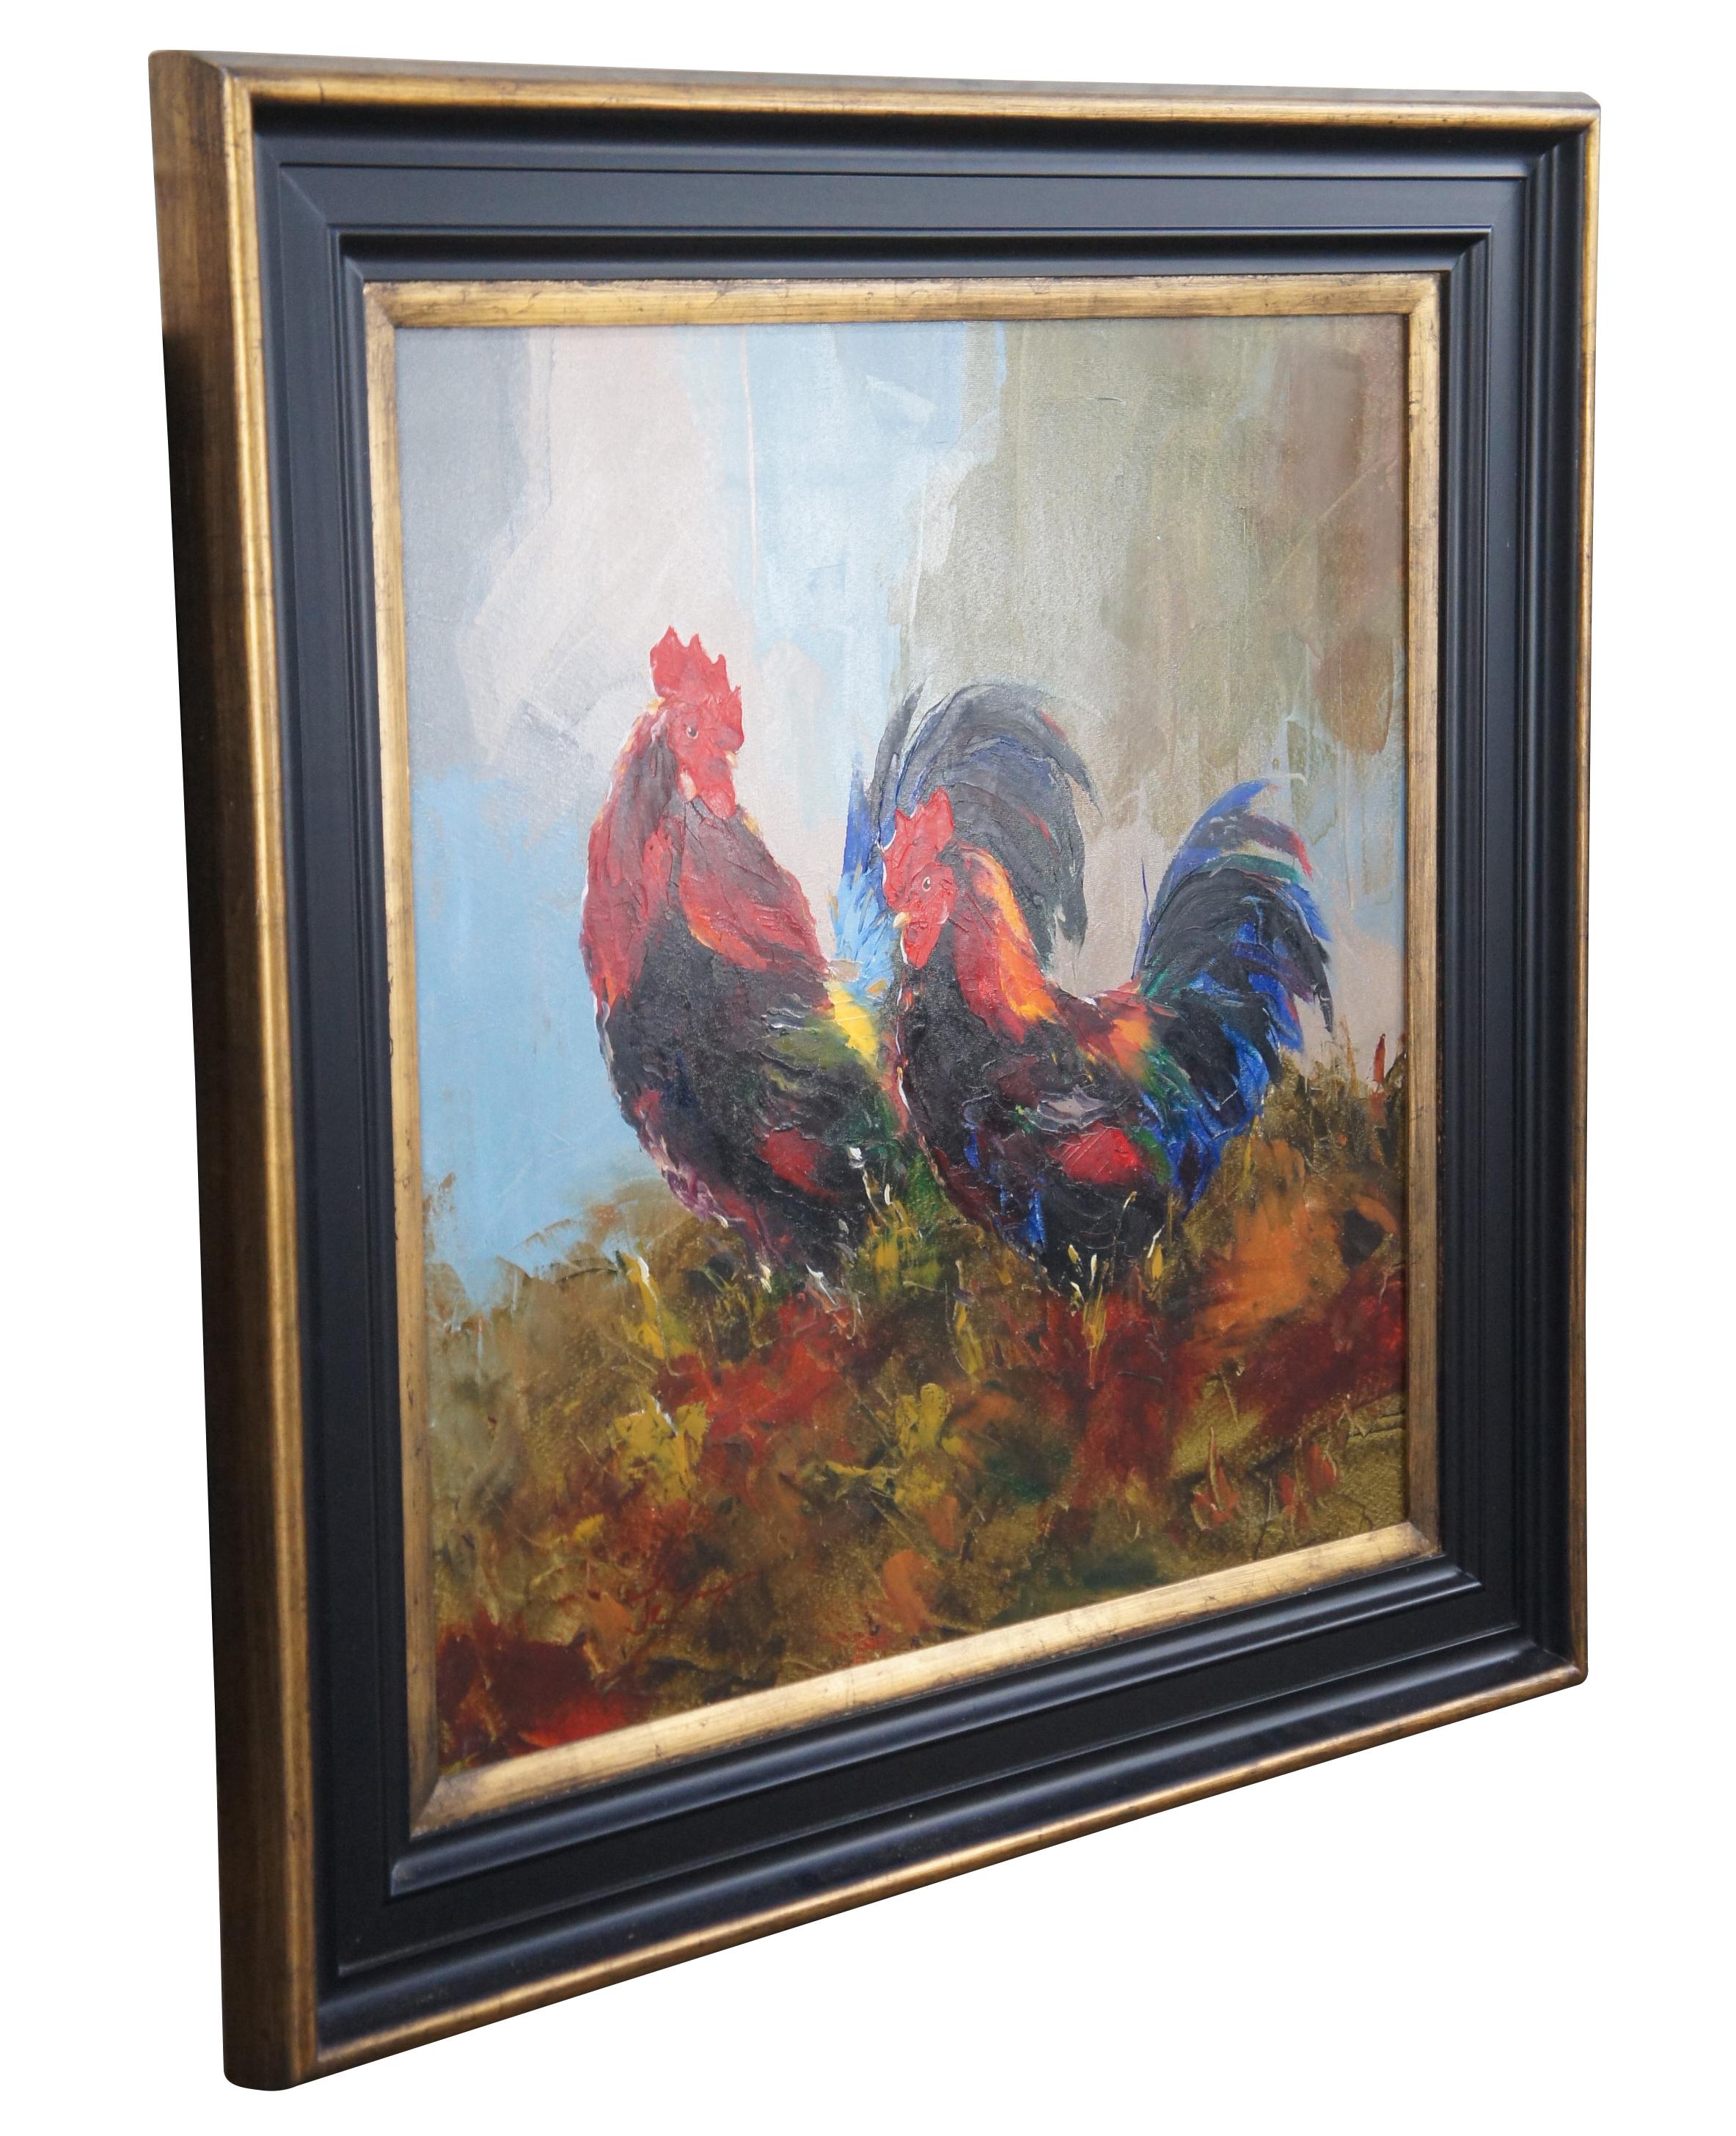 Vintage Impressionist country farmhouse oil painting featuring a pair of a Roosters / birds in a colorful spectrum of light. Signed lower left.

Dimensions: 
40